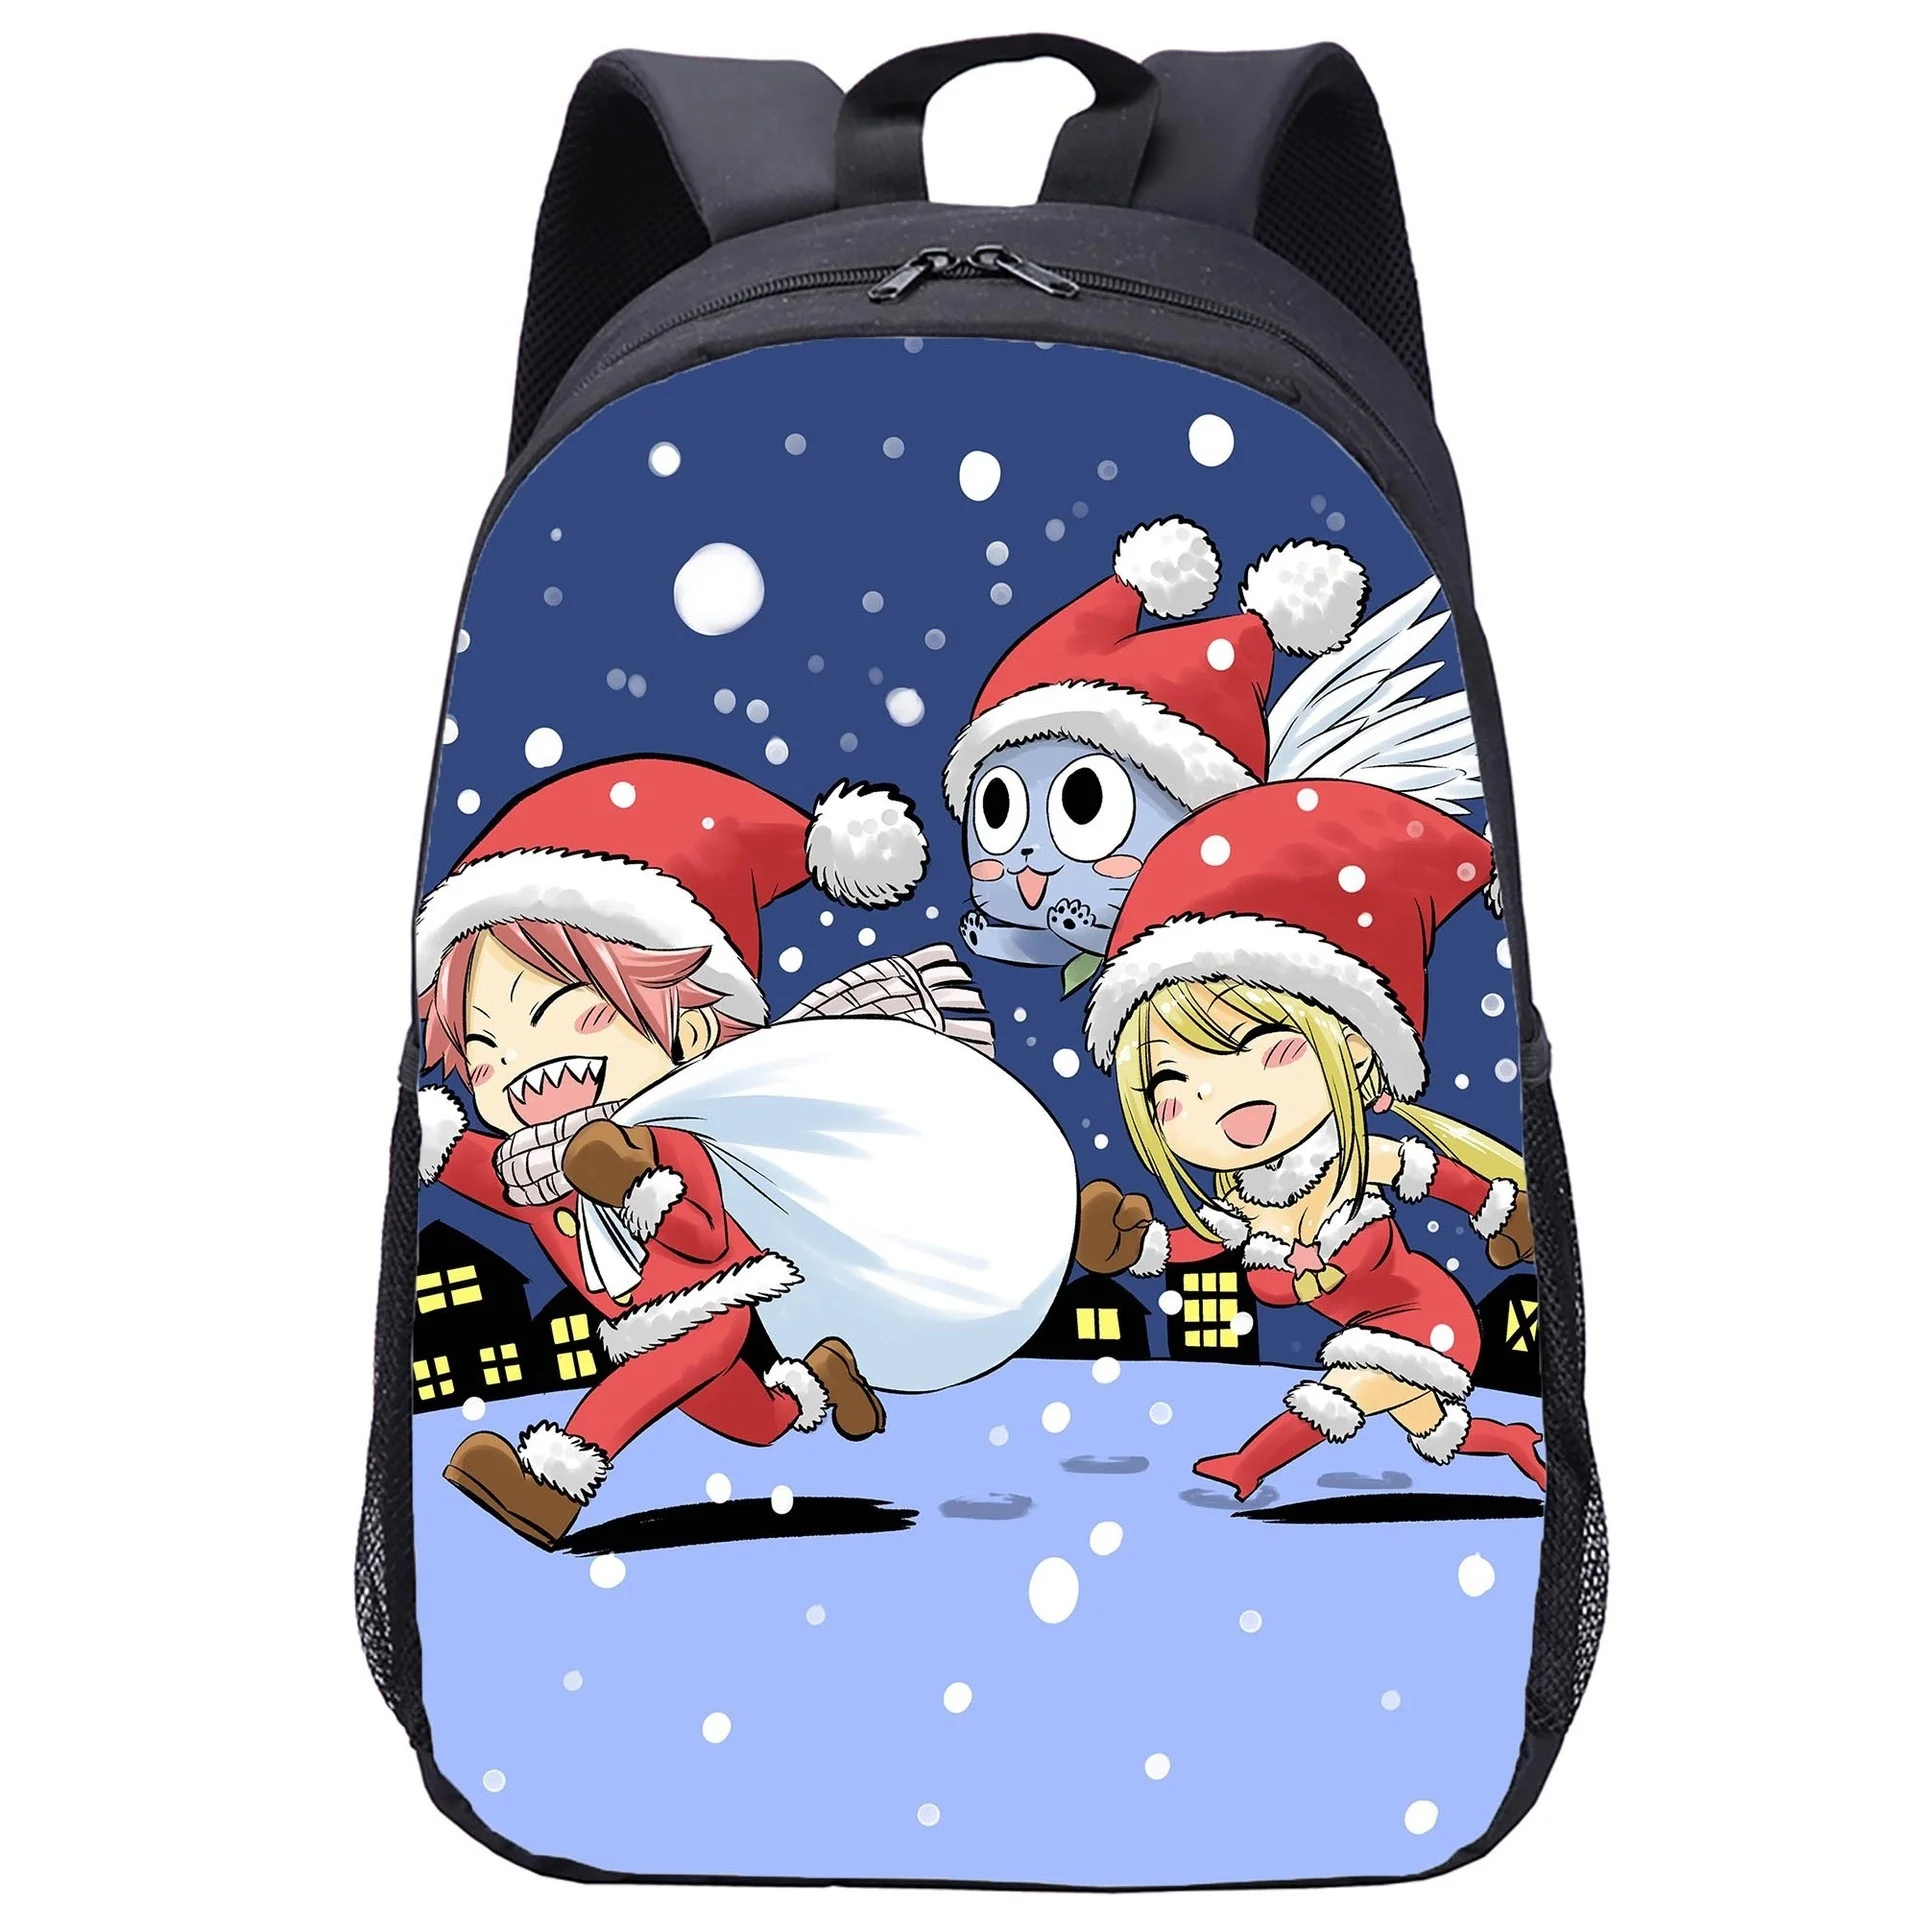 

3D Anime Fairy Tail School Backpack Large Capacity Wearable Backpack for Students Both Male and Female Adolescent Zipper Mochila